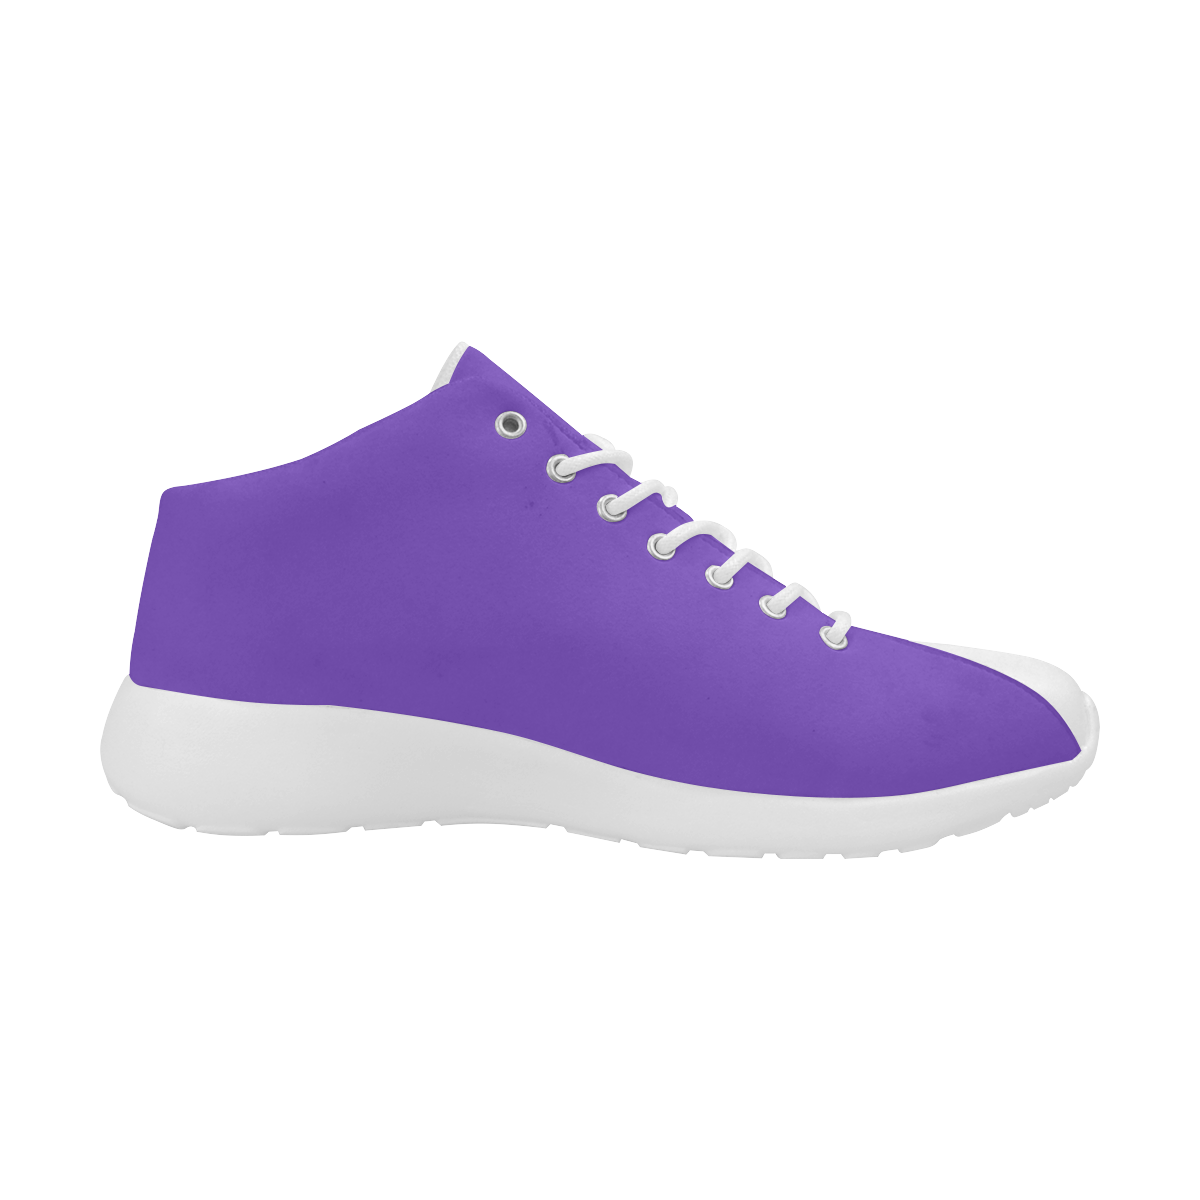 Purple Passion Solid Colored Men's Basketball Training Shoes (Model 47502)